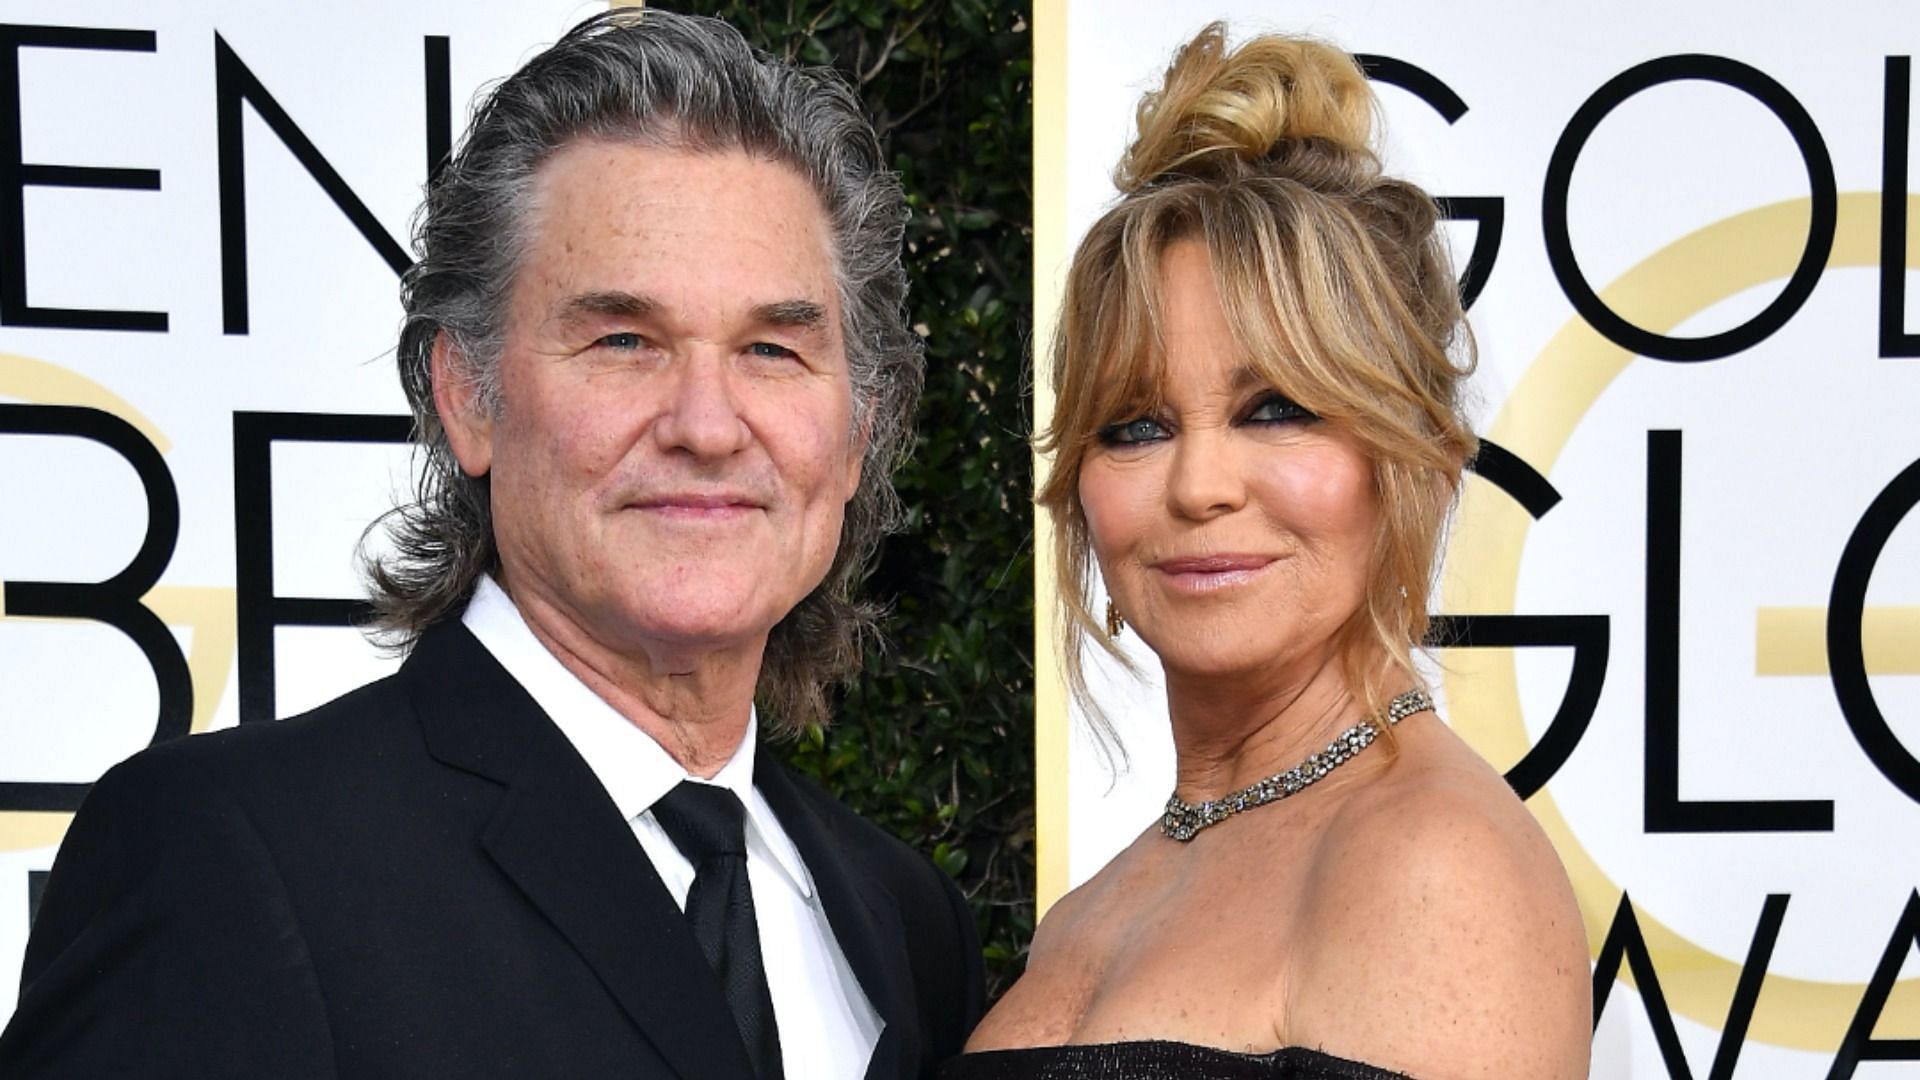 Kurt Russell and Goldie Hawn (Image via Getty Images)